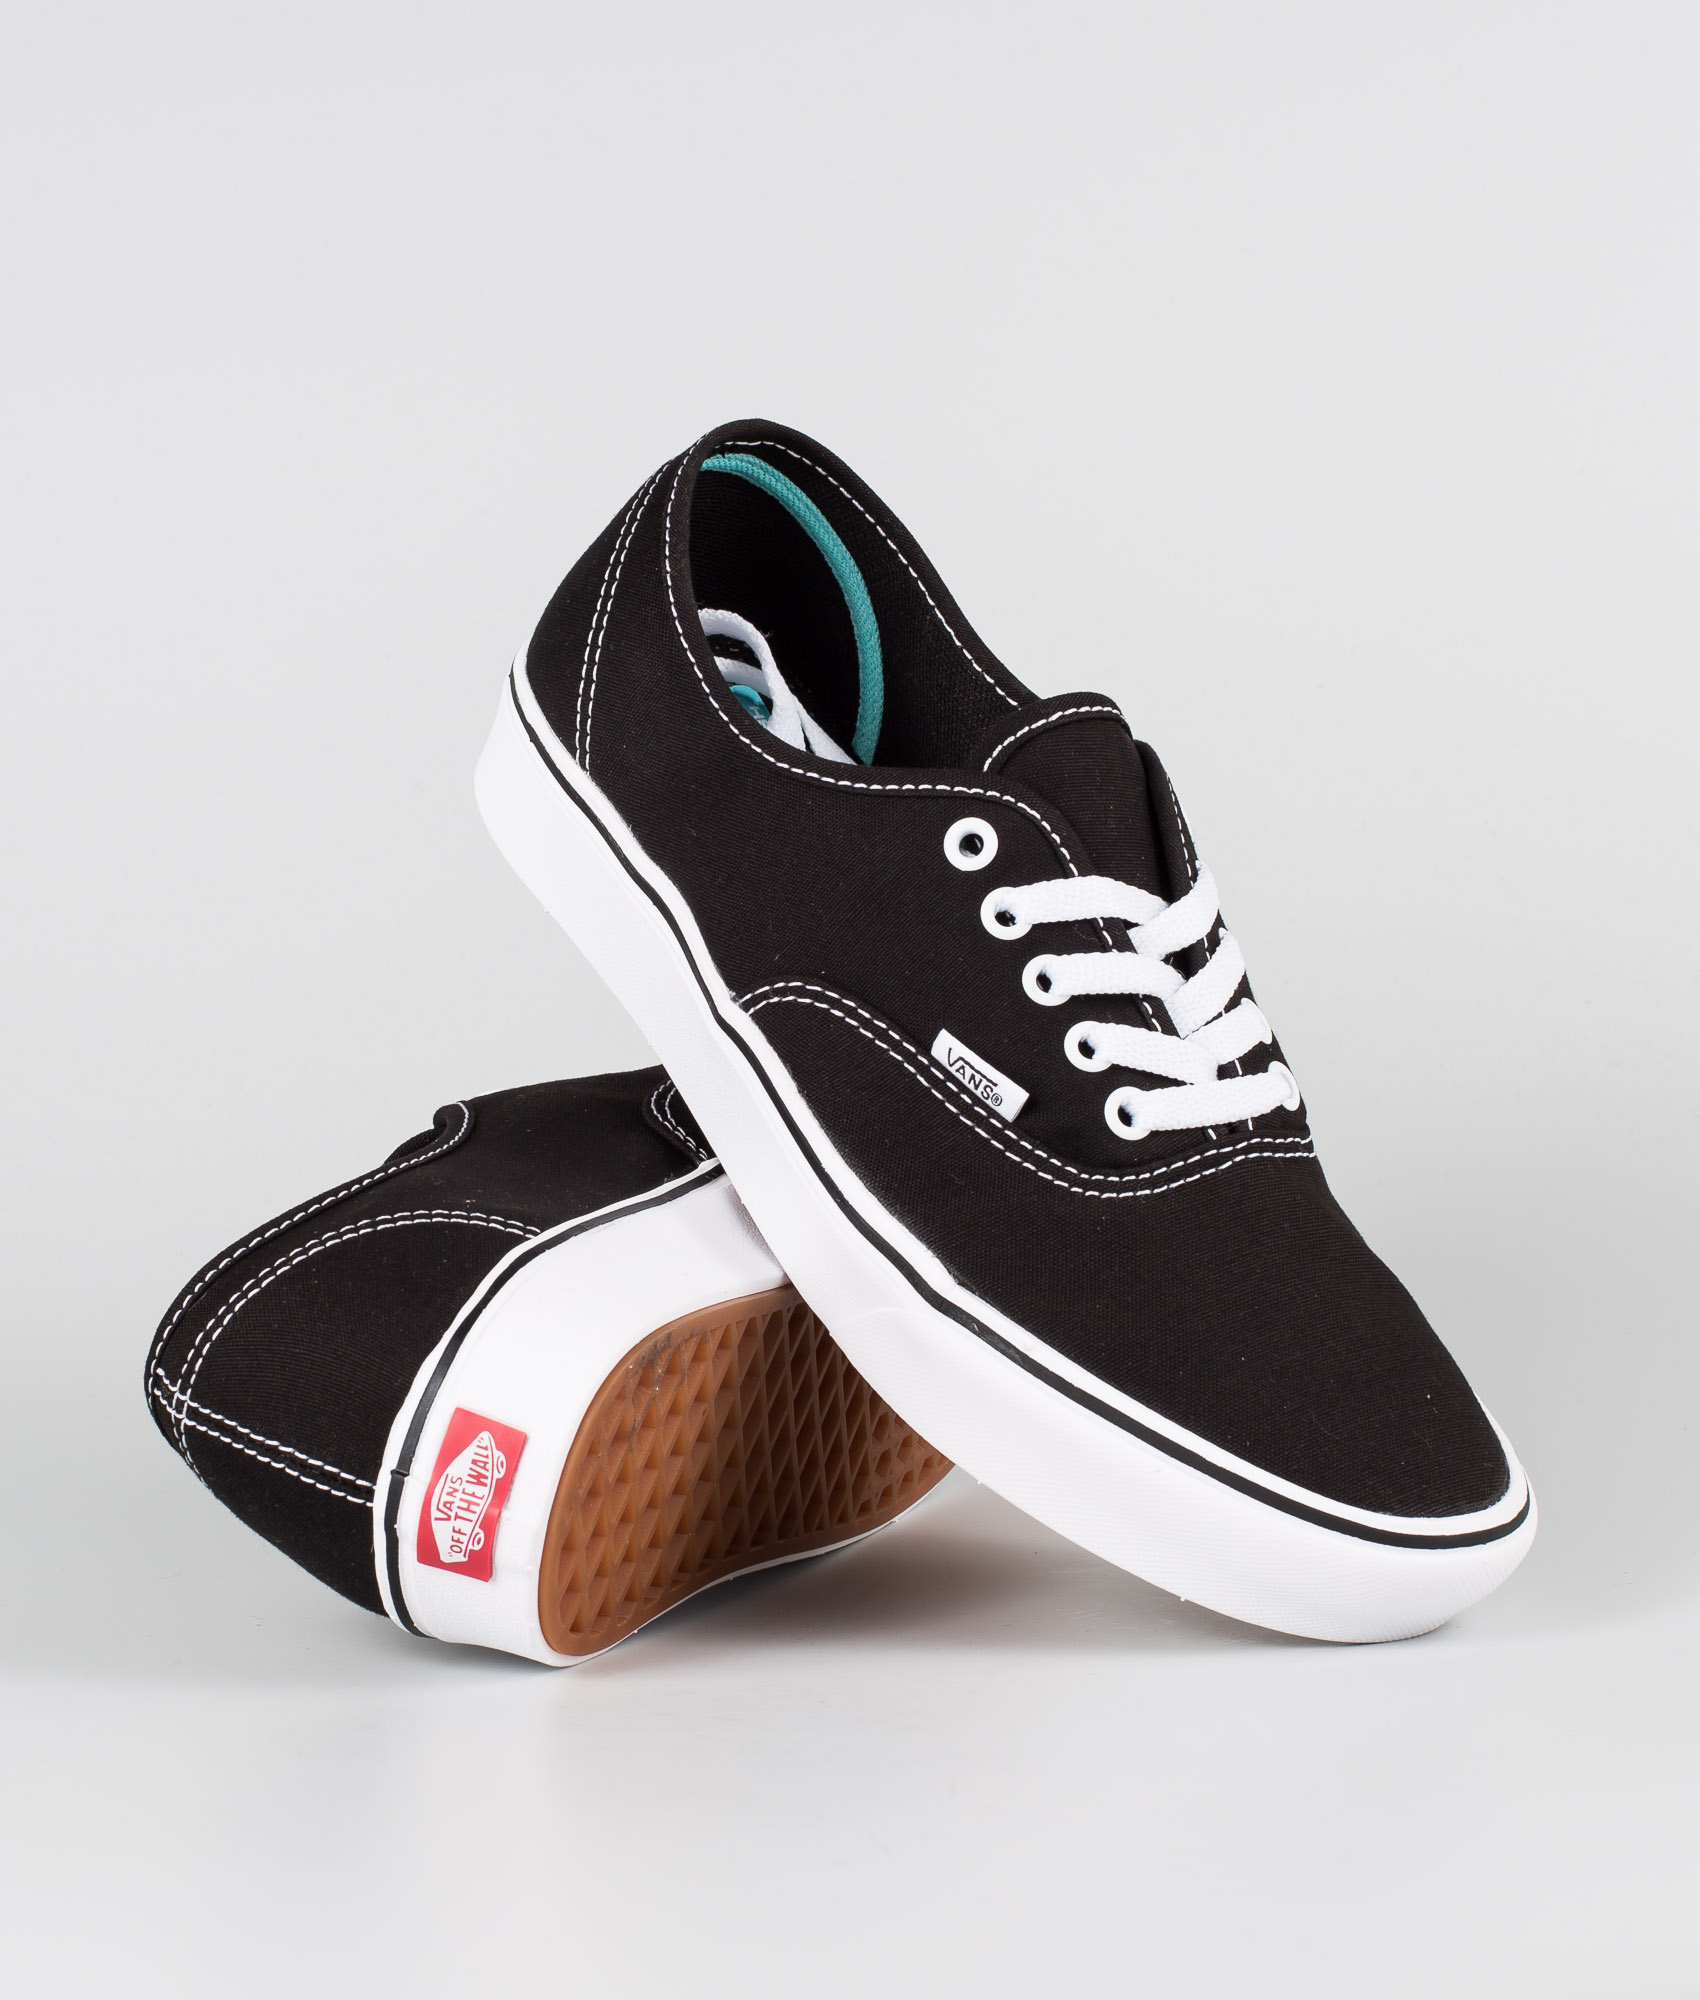 vans shoes grey and white